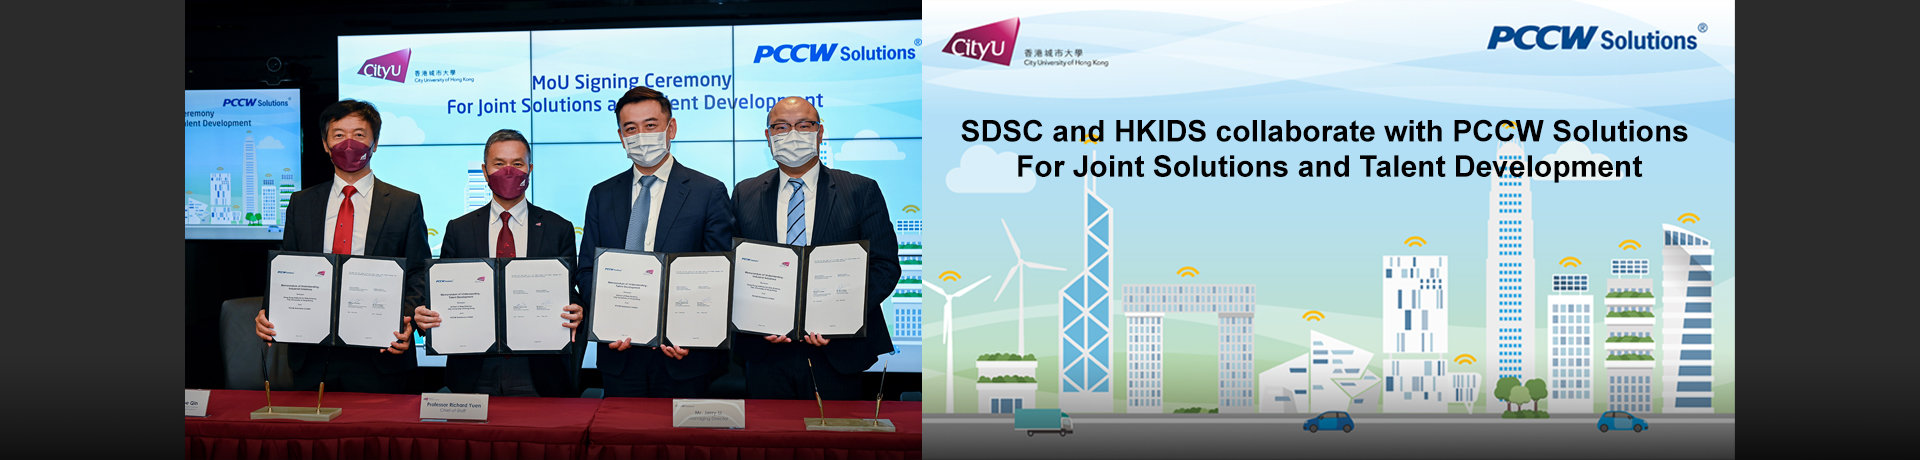 SDSC and HKIDS collaborate with PCCW Solutions For Joint Solutions and Talent Development